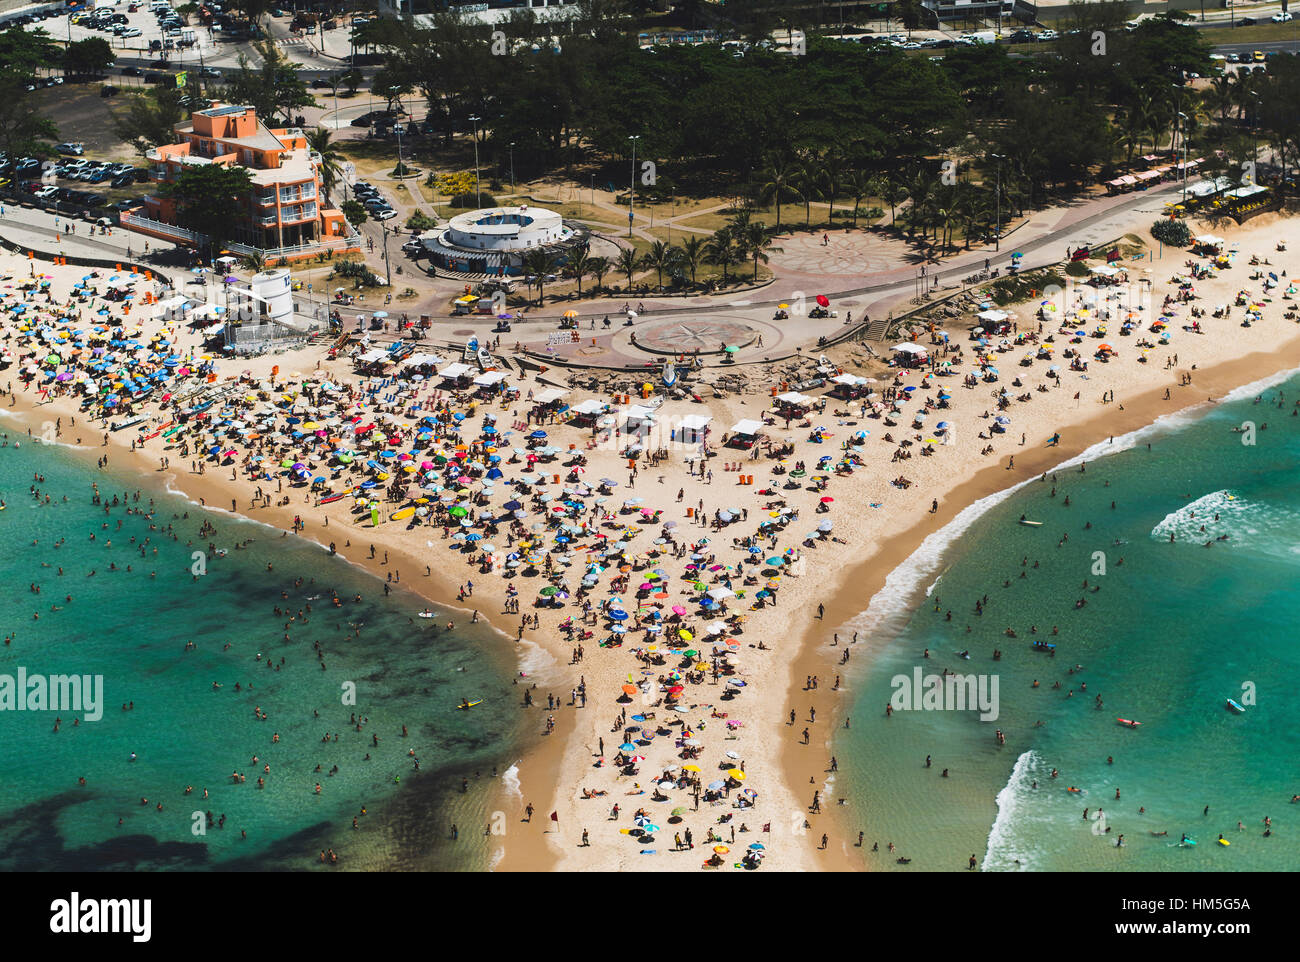 Aerial view of people enjoying at beach in city Stock Photo